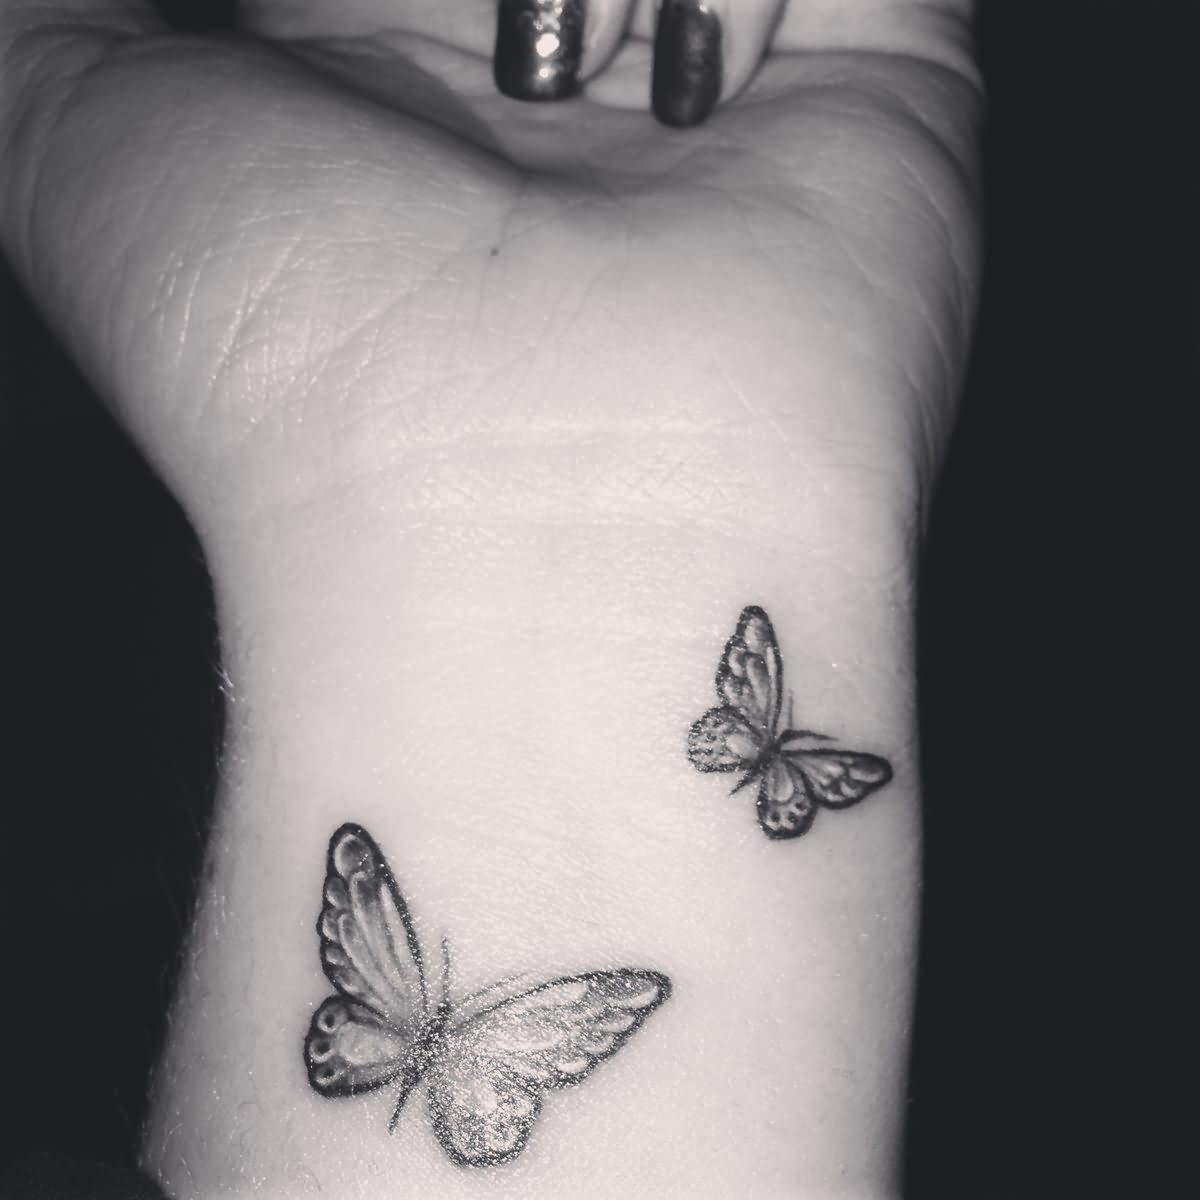 43 Awesome Butterfly Tattoos On Wrist in dimensions 1200 X 1200